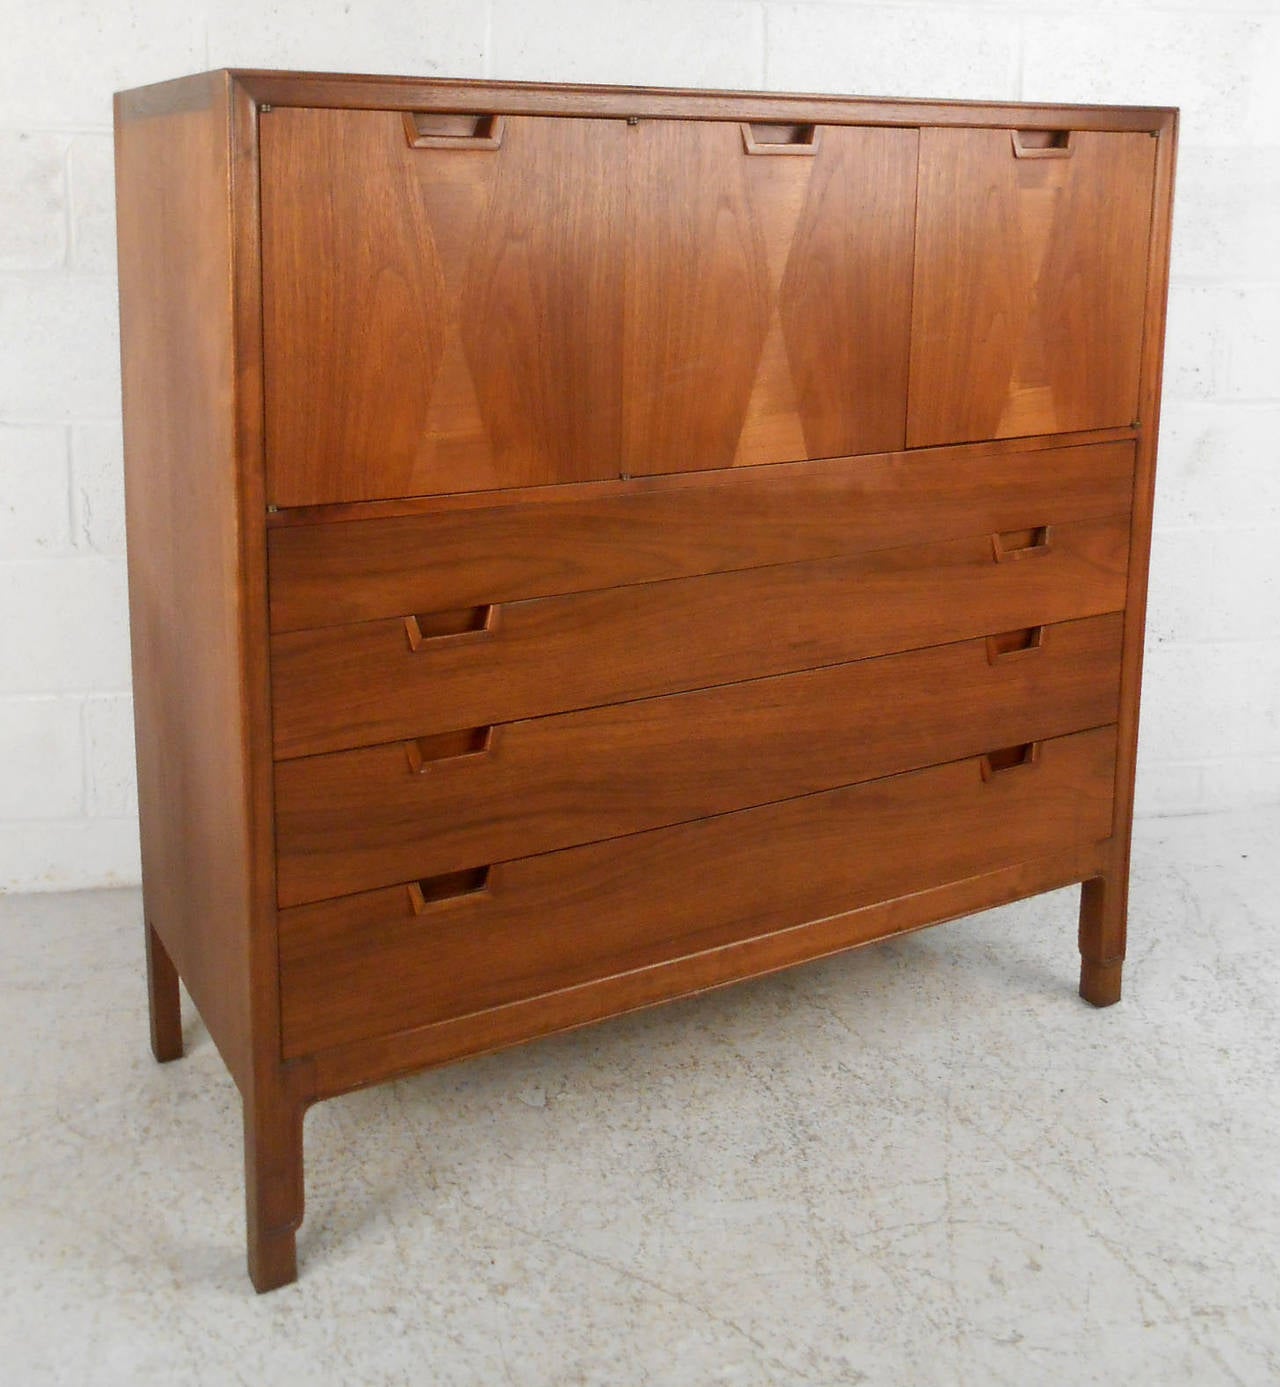 This beautiful Mid-Century high boy features unique cabinet or shelf storage set atop spacious drawers. Complete with John Stuart emblem, this beautiful piece is set apart by its substantial construction and unique drawer pulls. Please confirm item